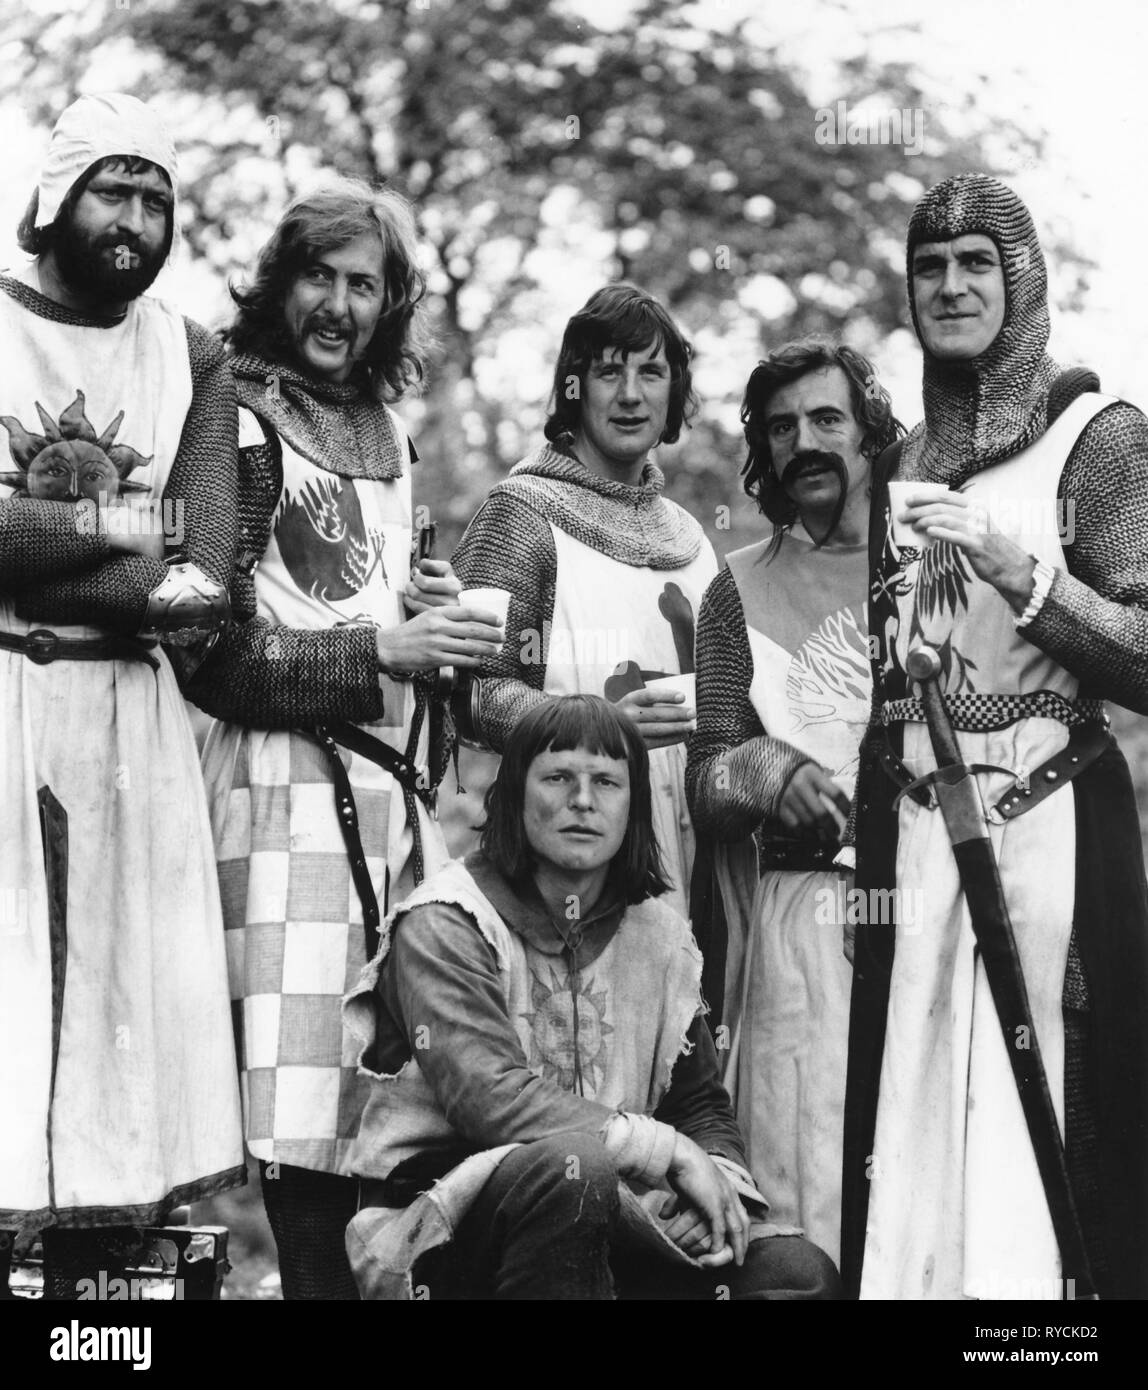 JOHN CLEESE, MICHAEL PALIN, TERRY JONES, ERIC IDLE, GRAHAM CHAPMAN,TERRY GILLIAM, MONTY PYTHON AND THE HOLY GRAIL, 1975 Stock Photo